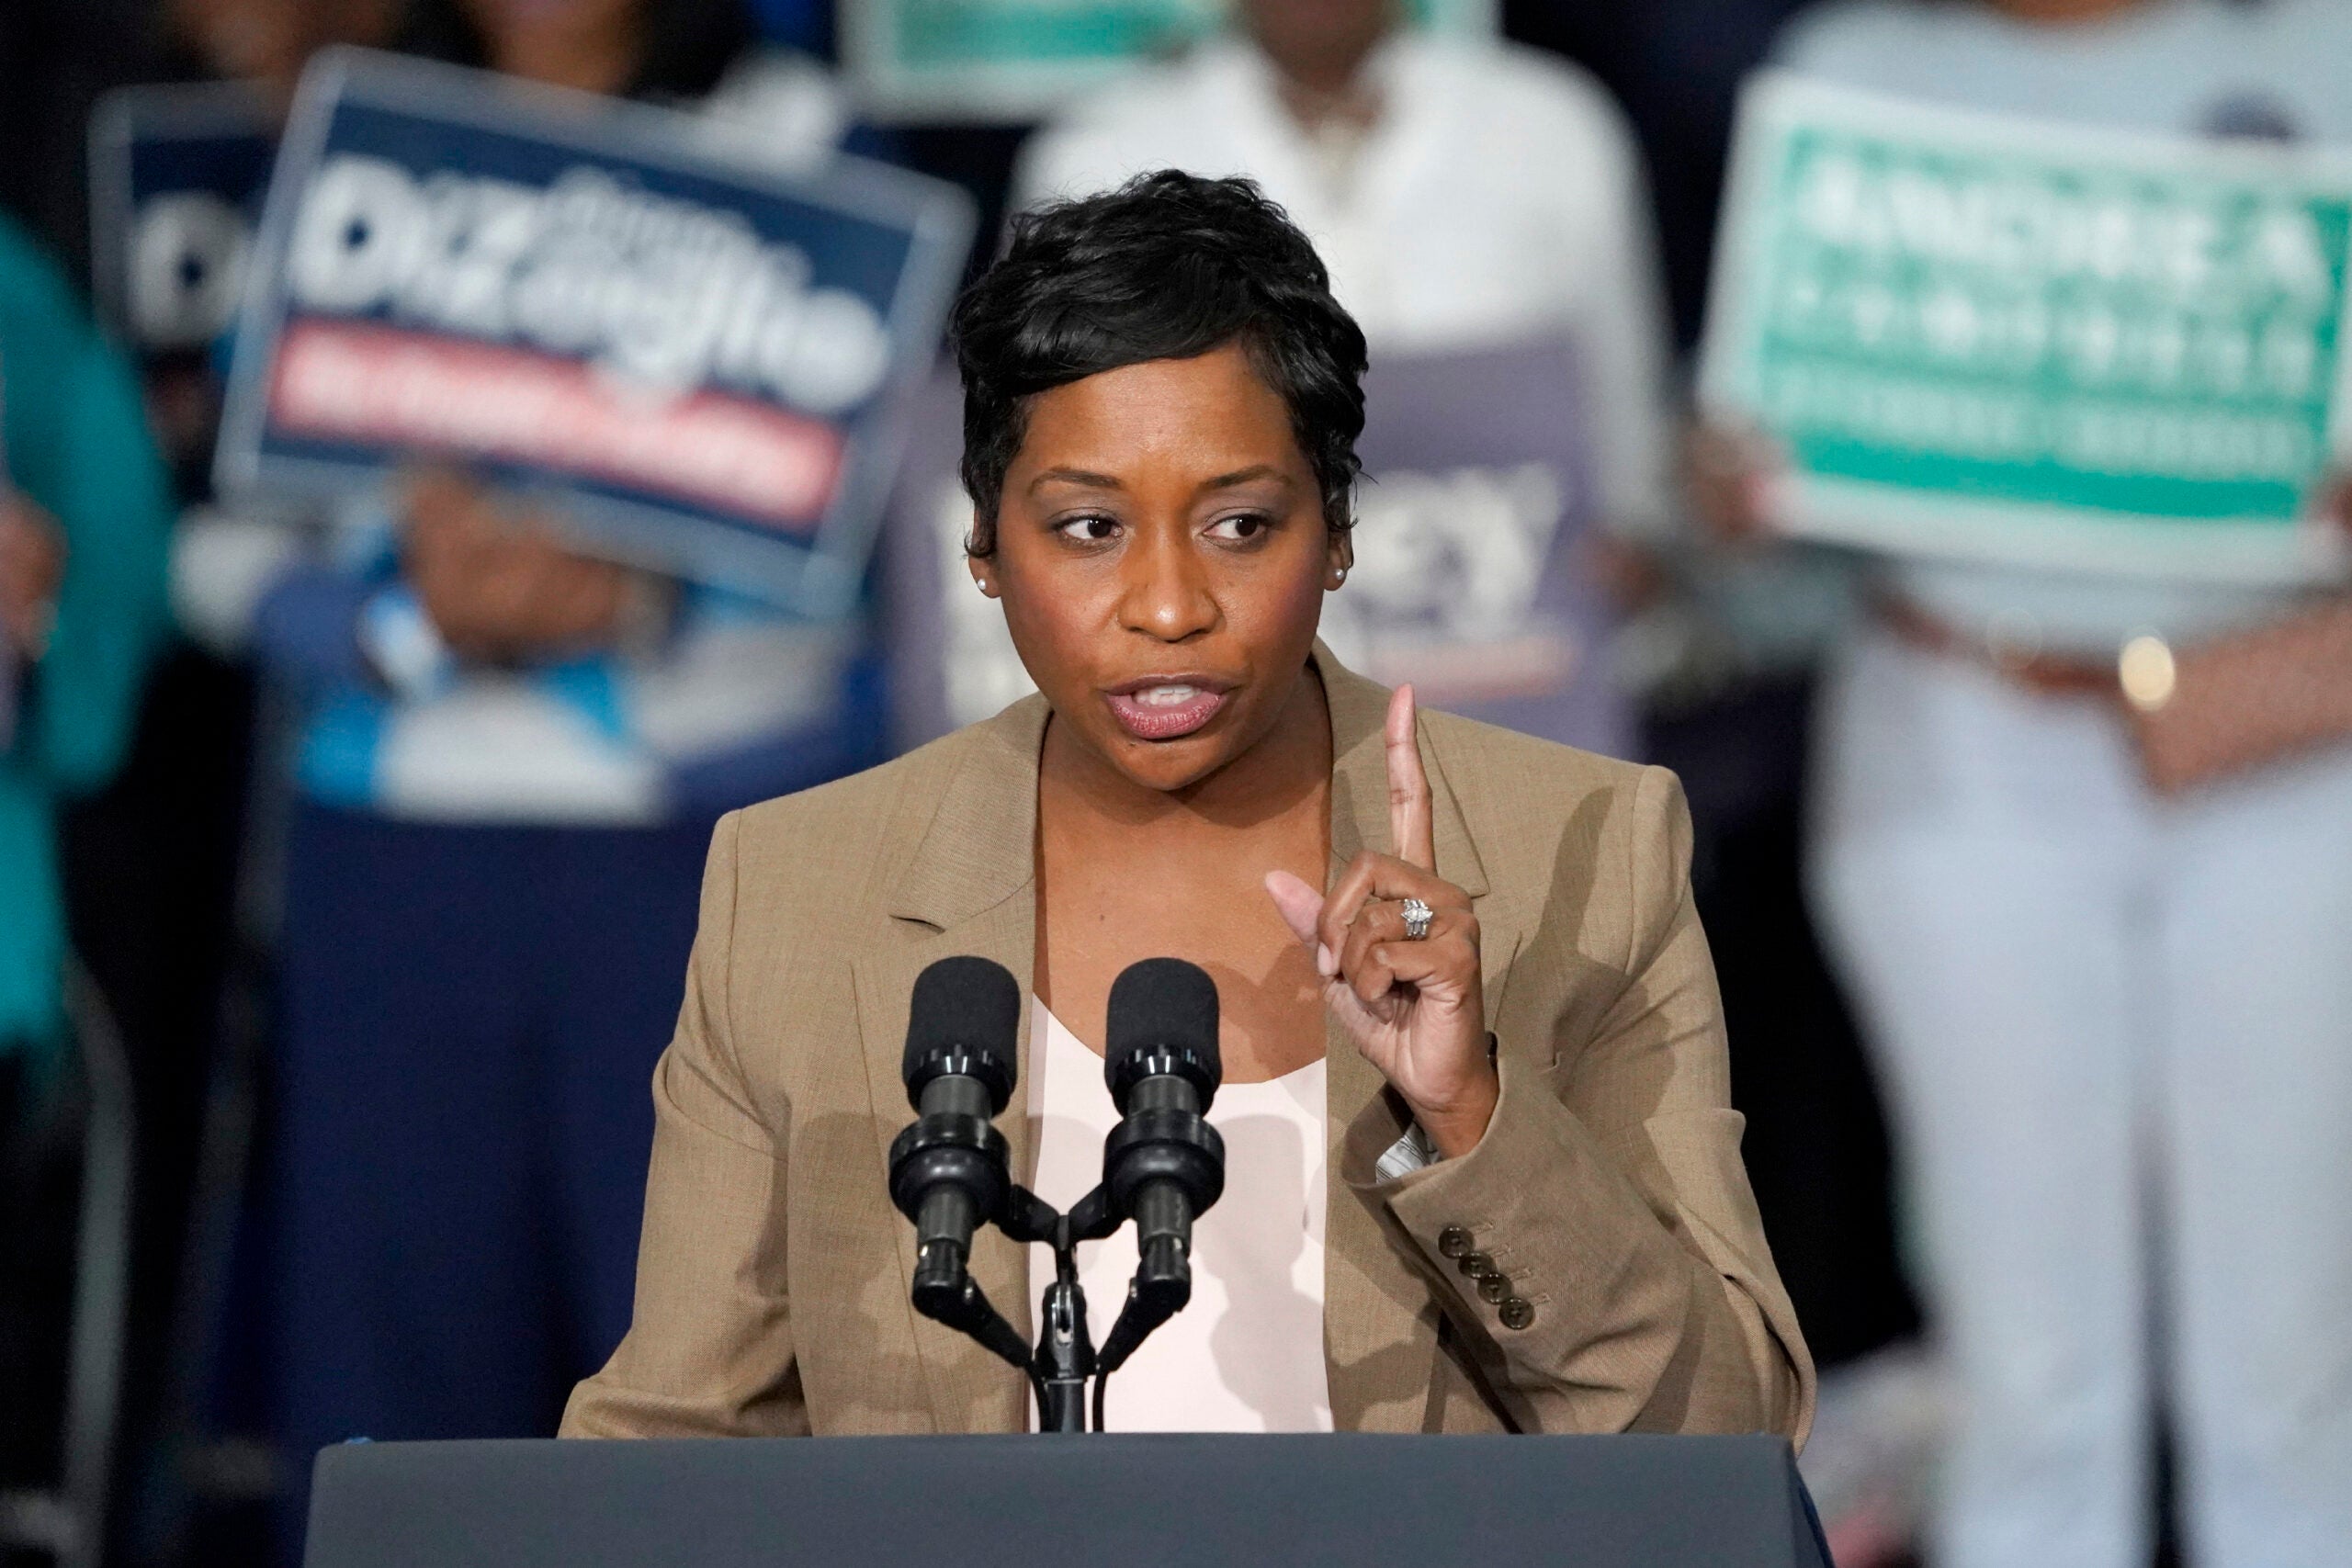 Massachusetts Attorney General nominee Andrea Campbell speaks Nov. 2, 2022, during a campaign rally in Boston.